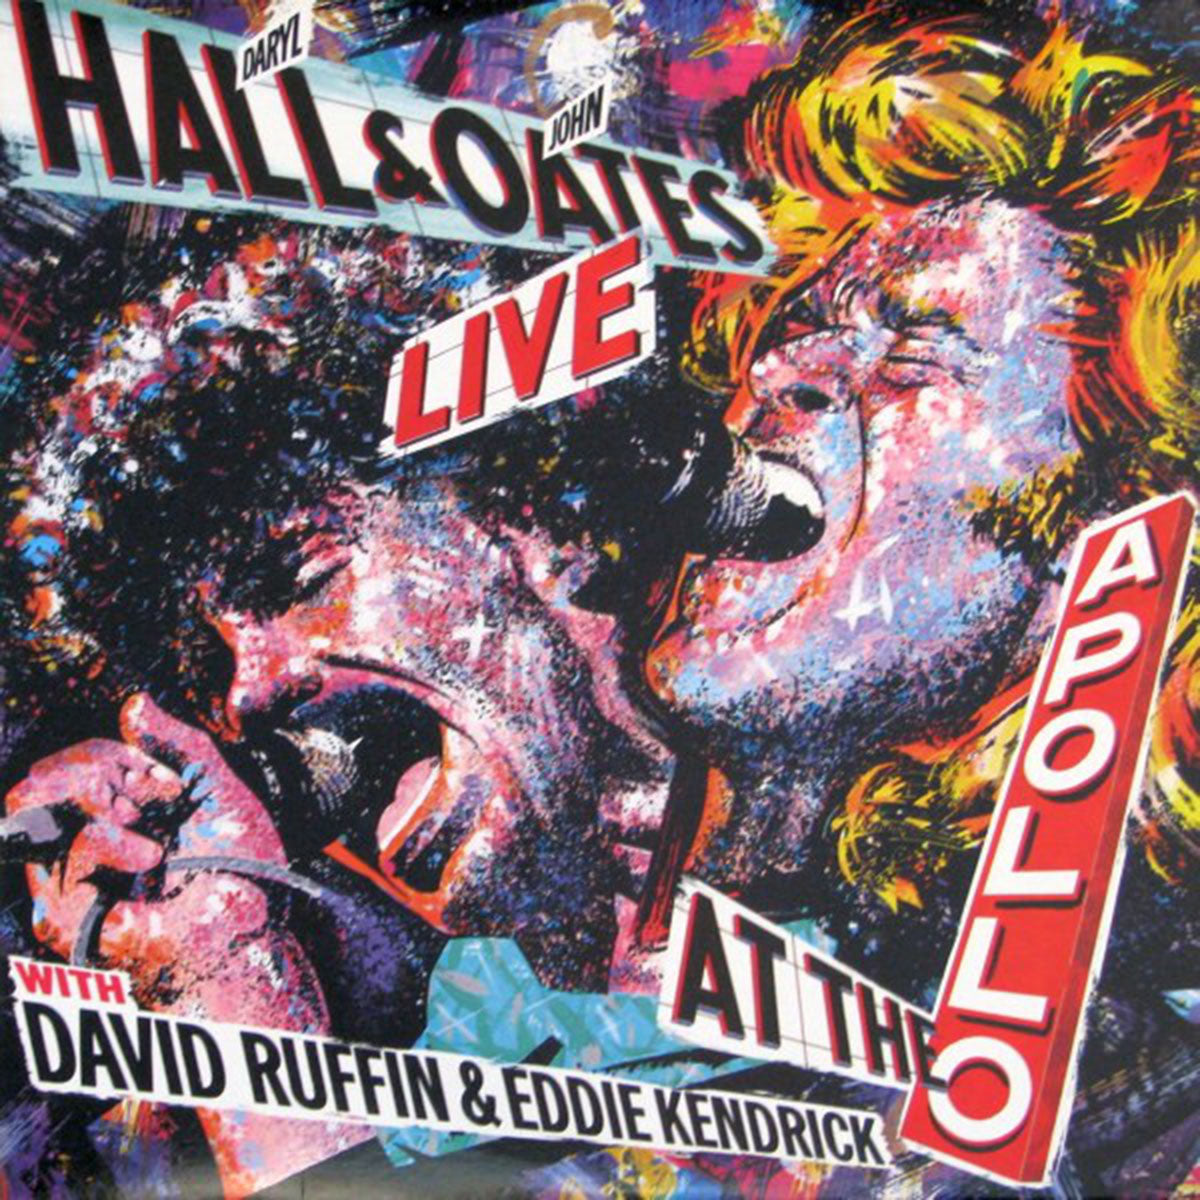 Daryl Hall & John Oates – Live At The Apollo - 1985 in Shrinkwrap!